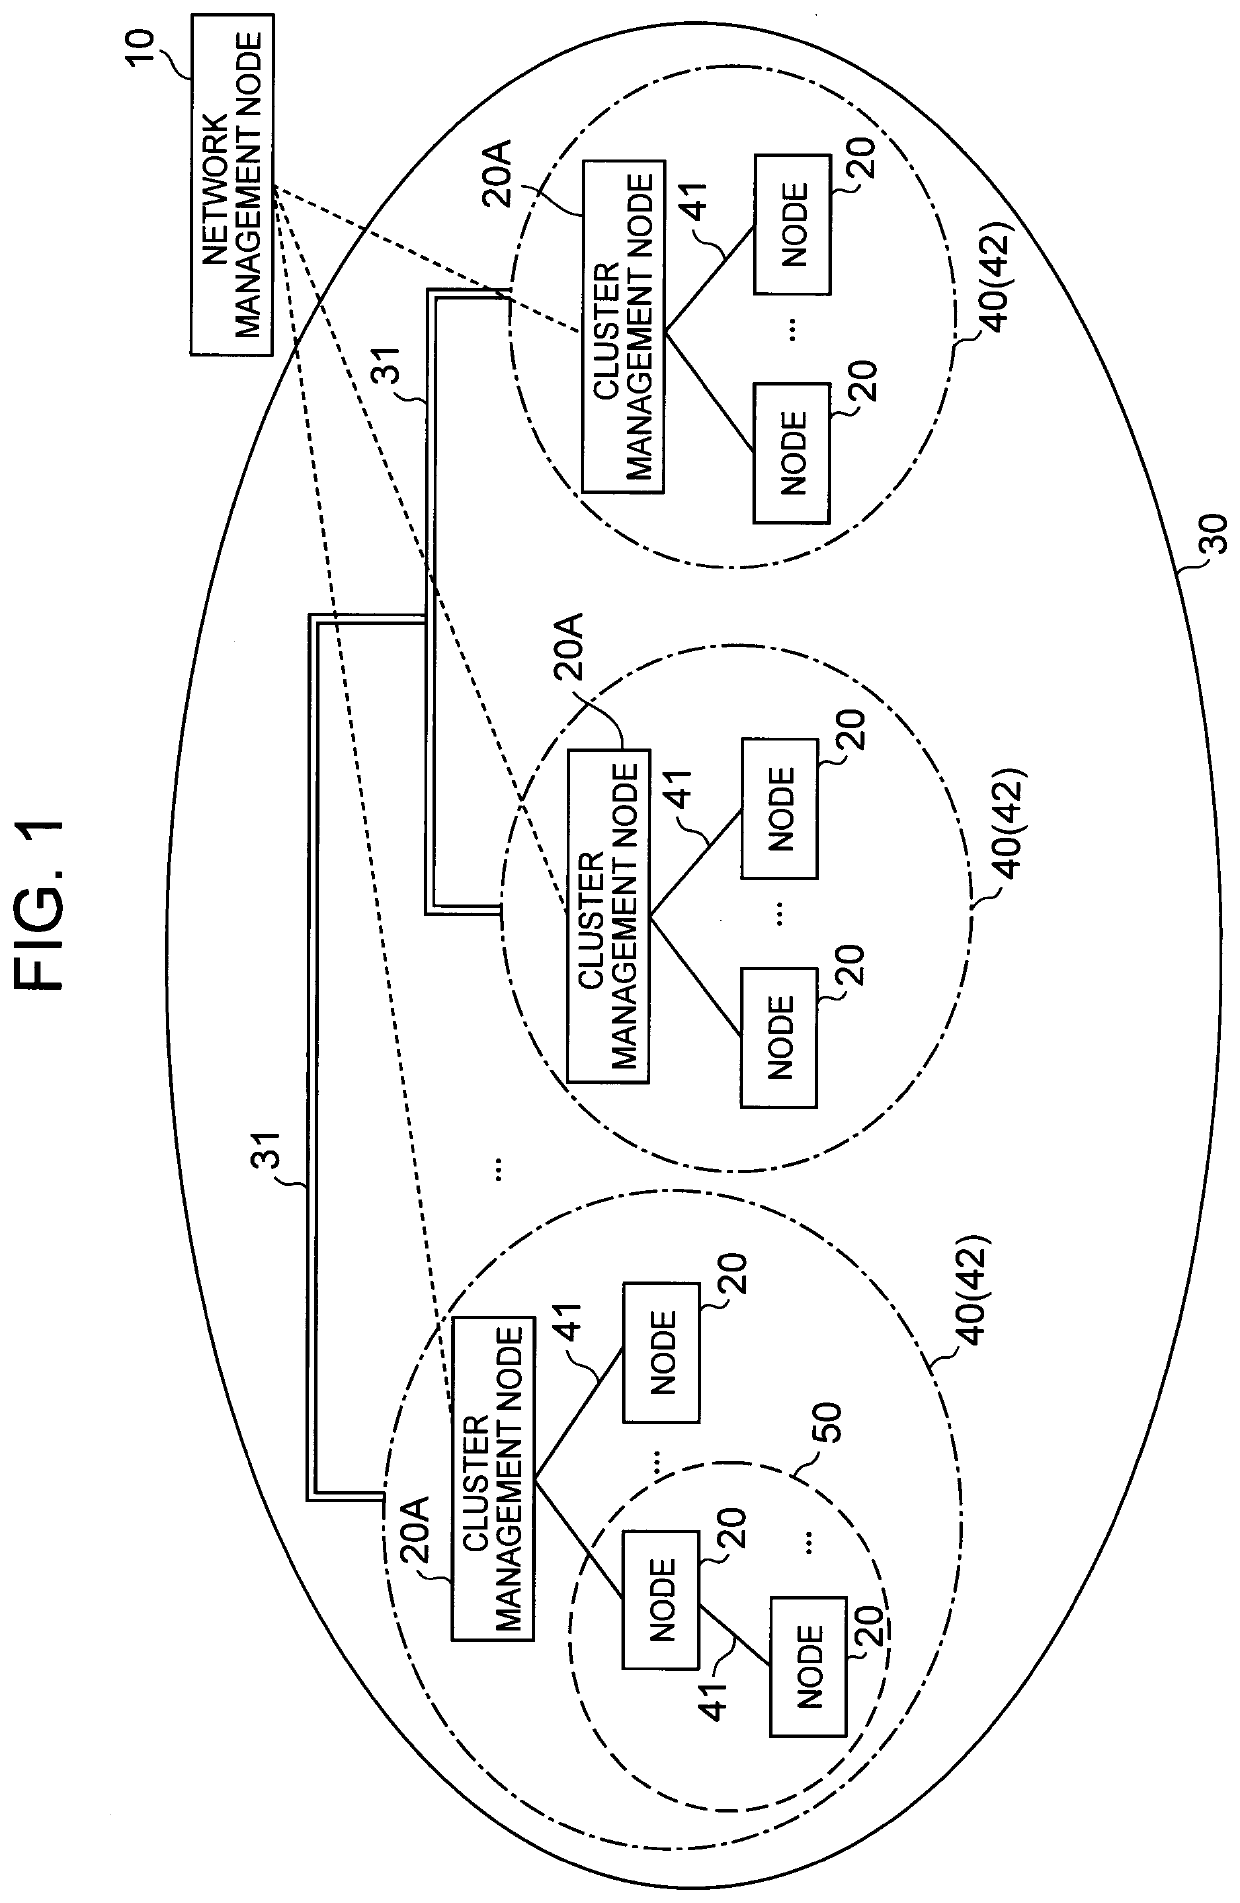 Network control system, method and program